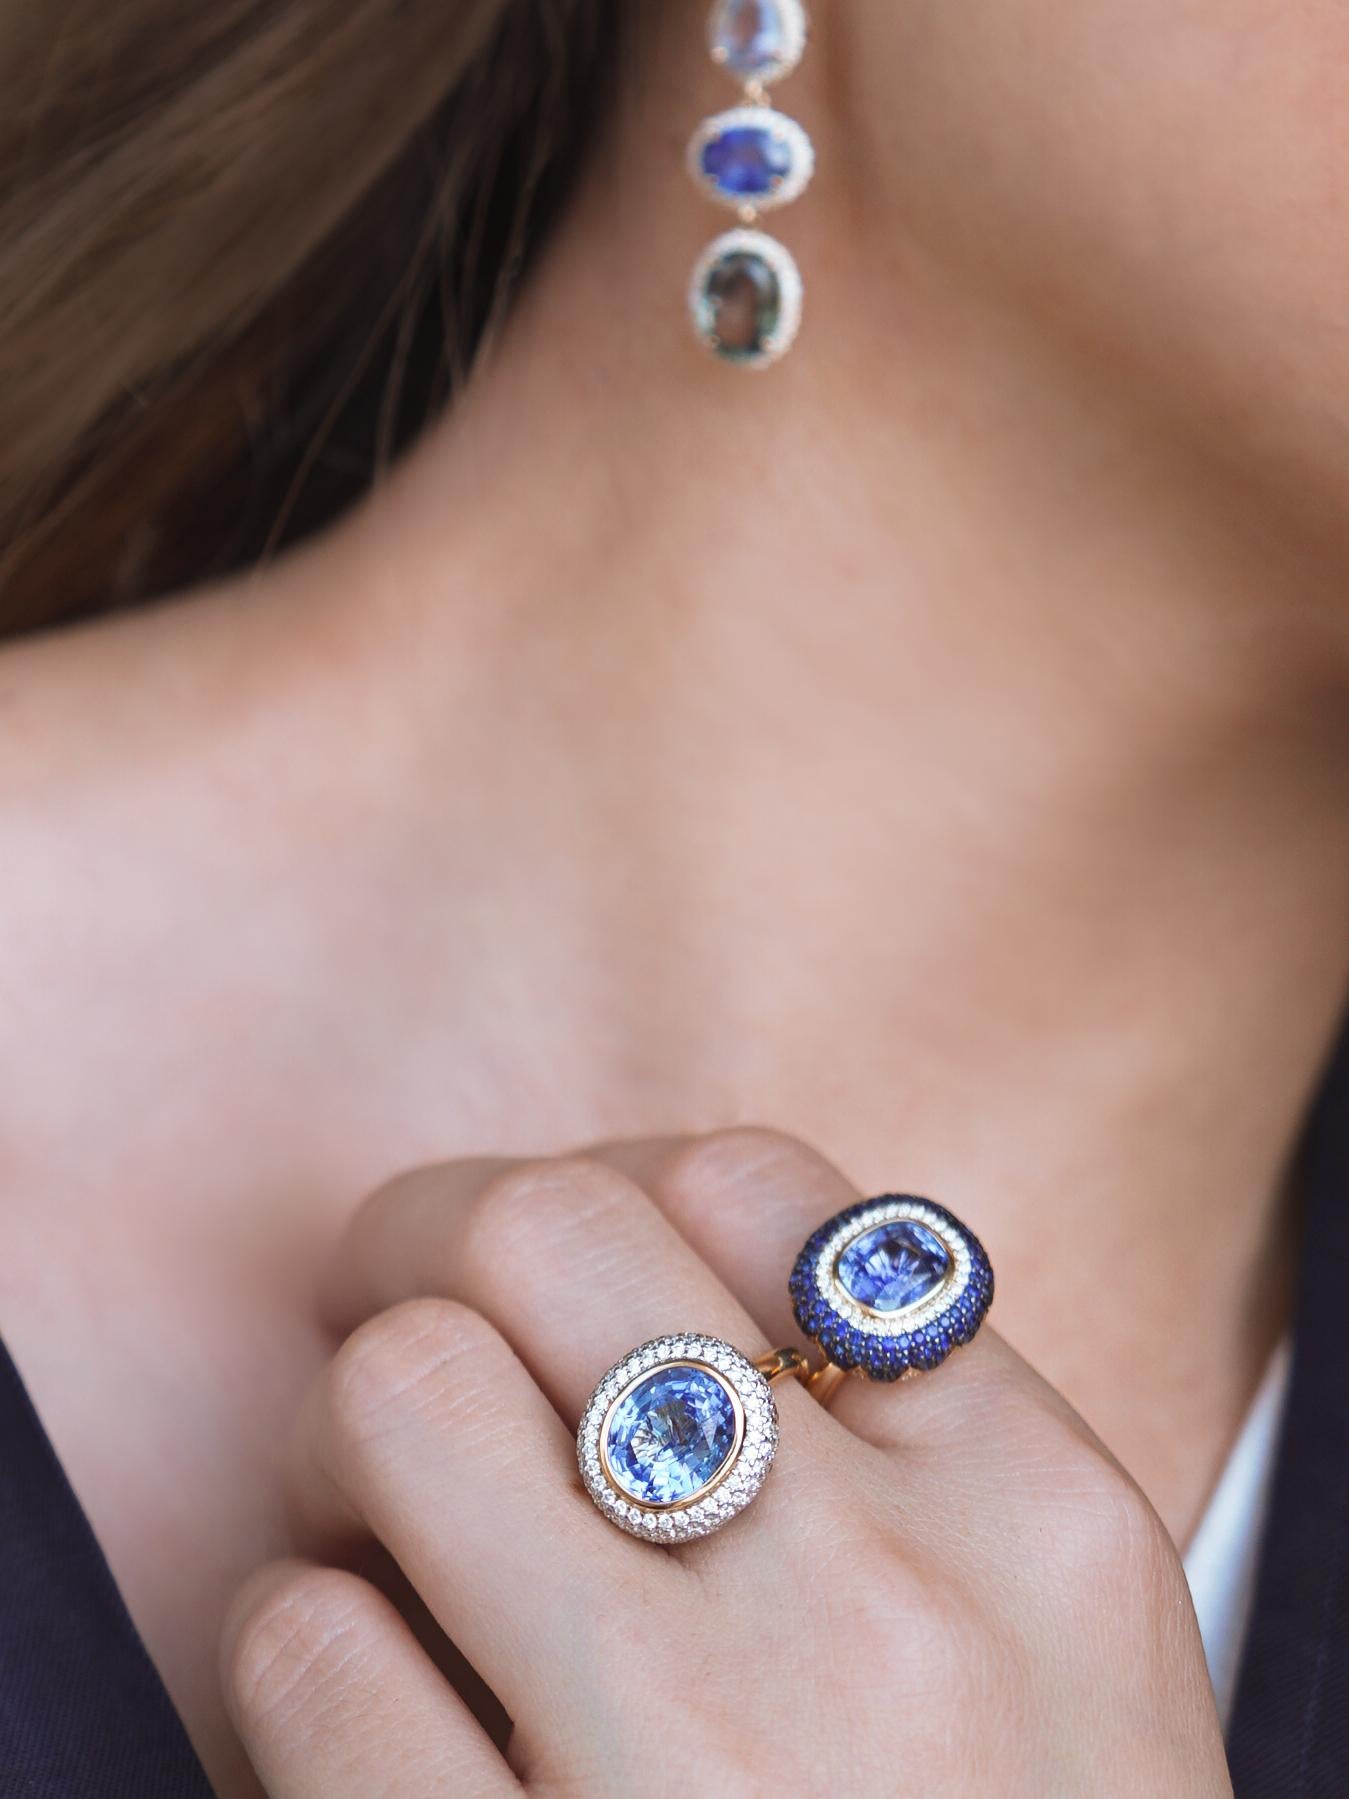 14k Yellow Gold. These any-finger rings include a dazzling Ceylon Blue Sapphire solitaire, pave set blue sapphire petals in a lotus motif and pave set brilliant cut white diamonds. Rinoor's re-imagined rings, are incredibly versatile and can be worn